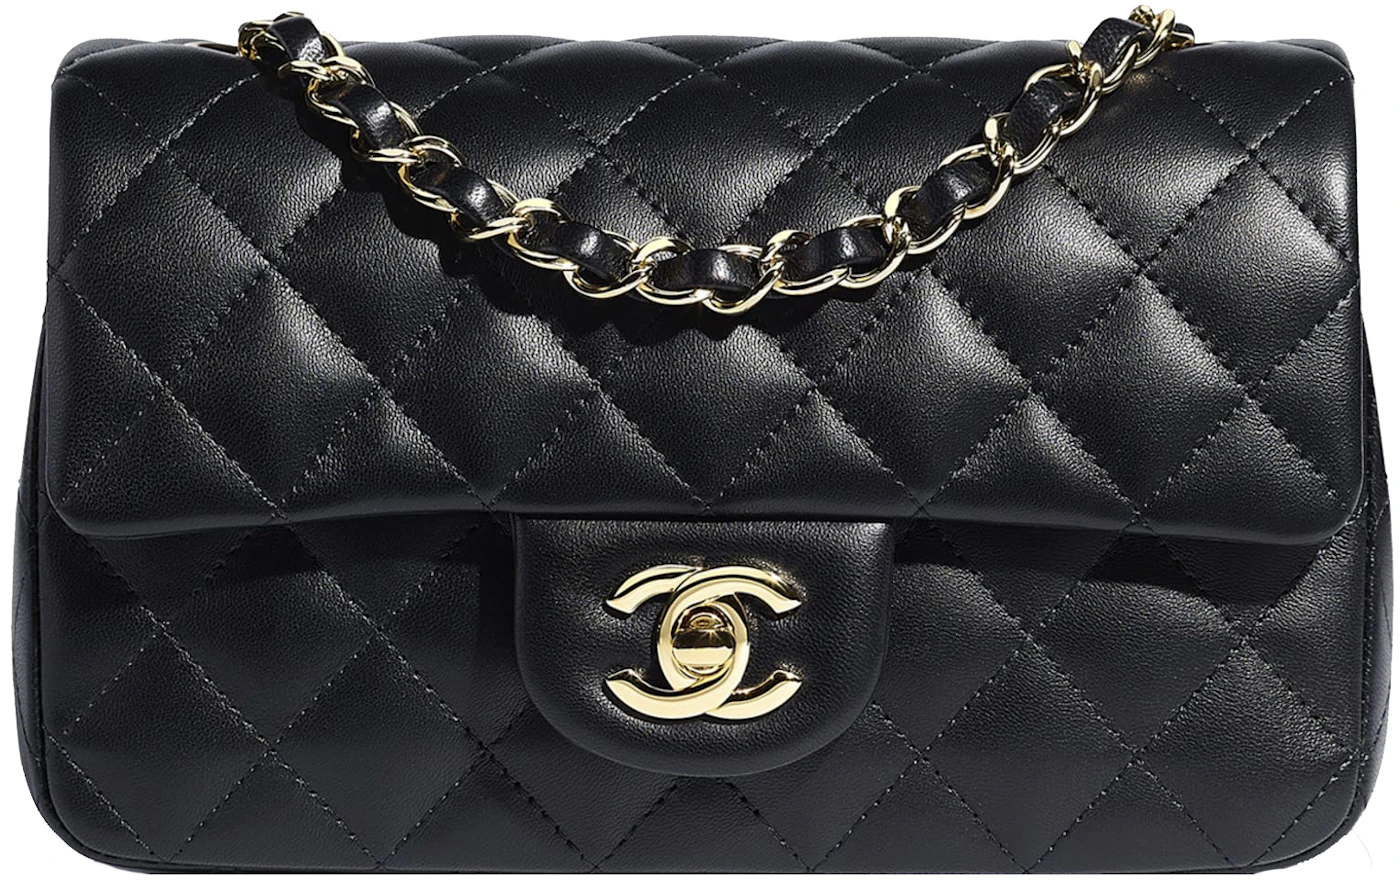 Coco Chanel Signed - 380 For Sale on 1stDibs